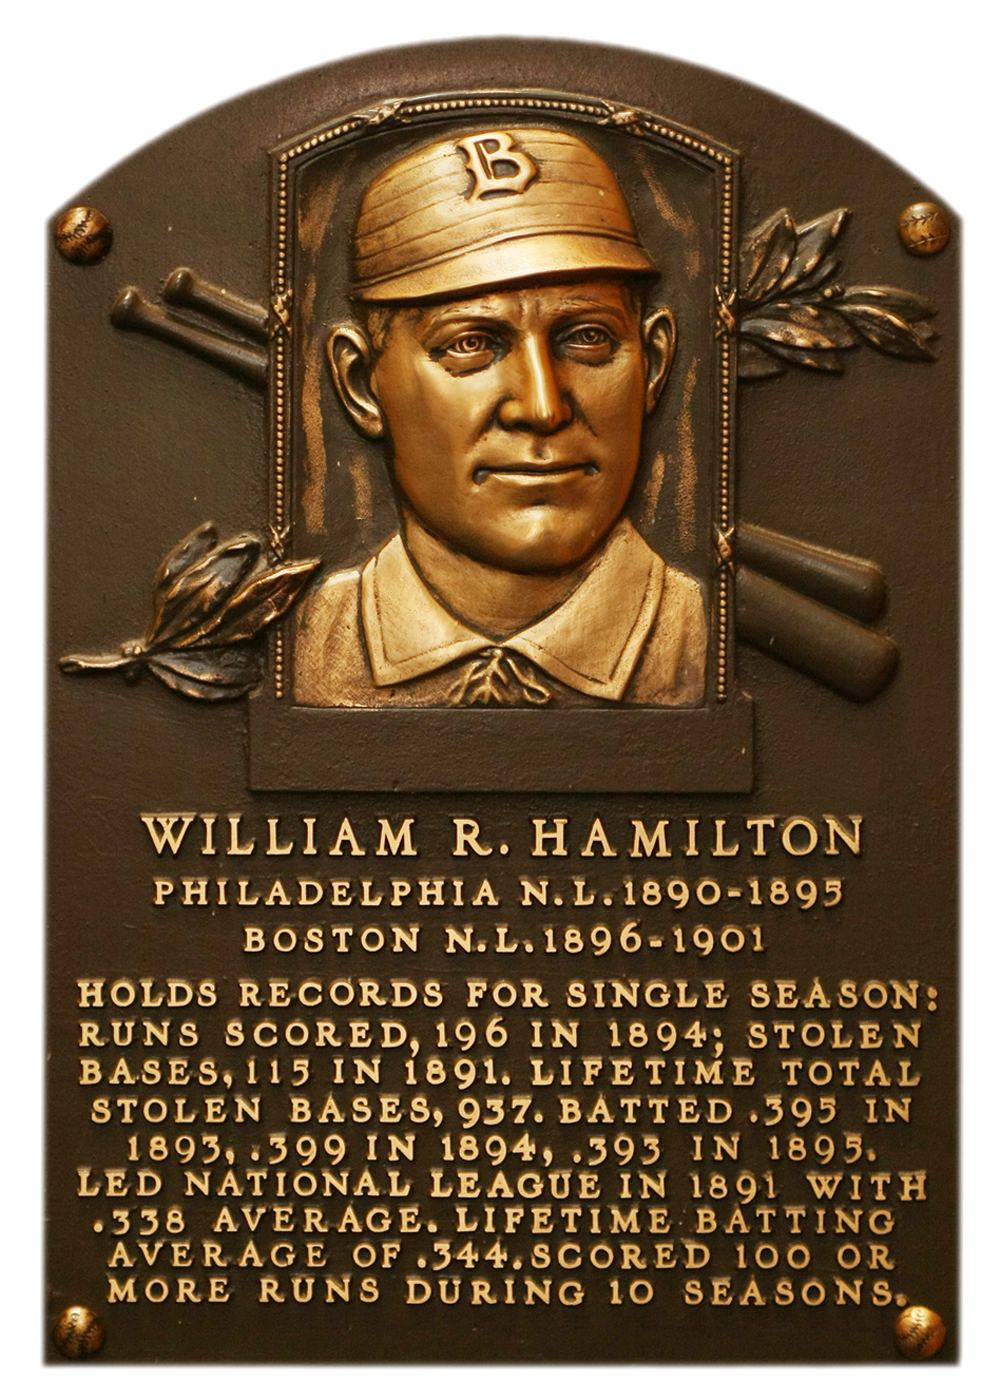 Billy Hamilton Hall of Fame plaque